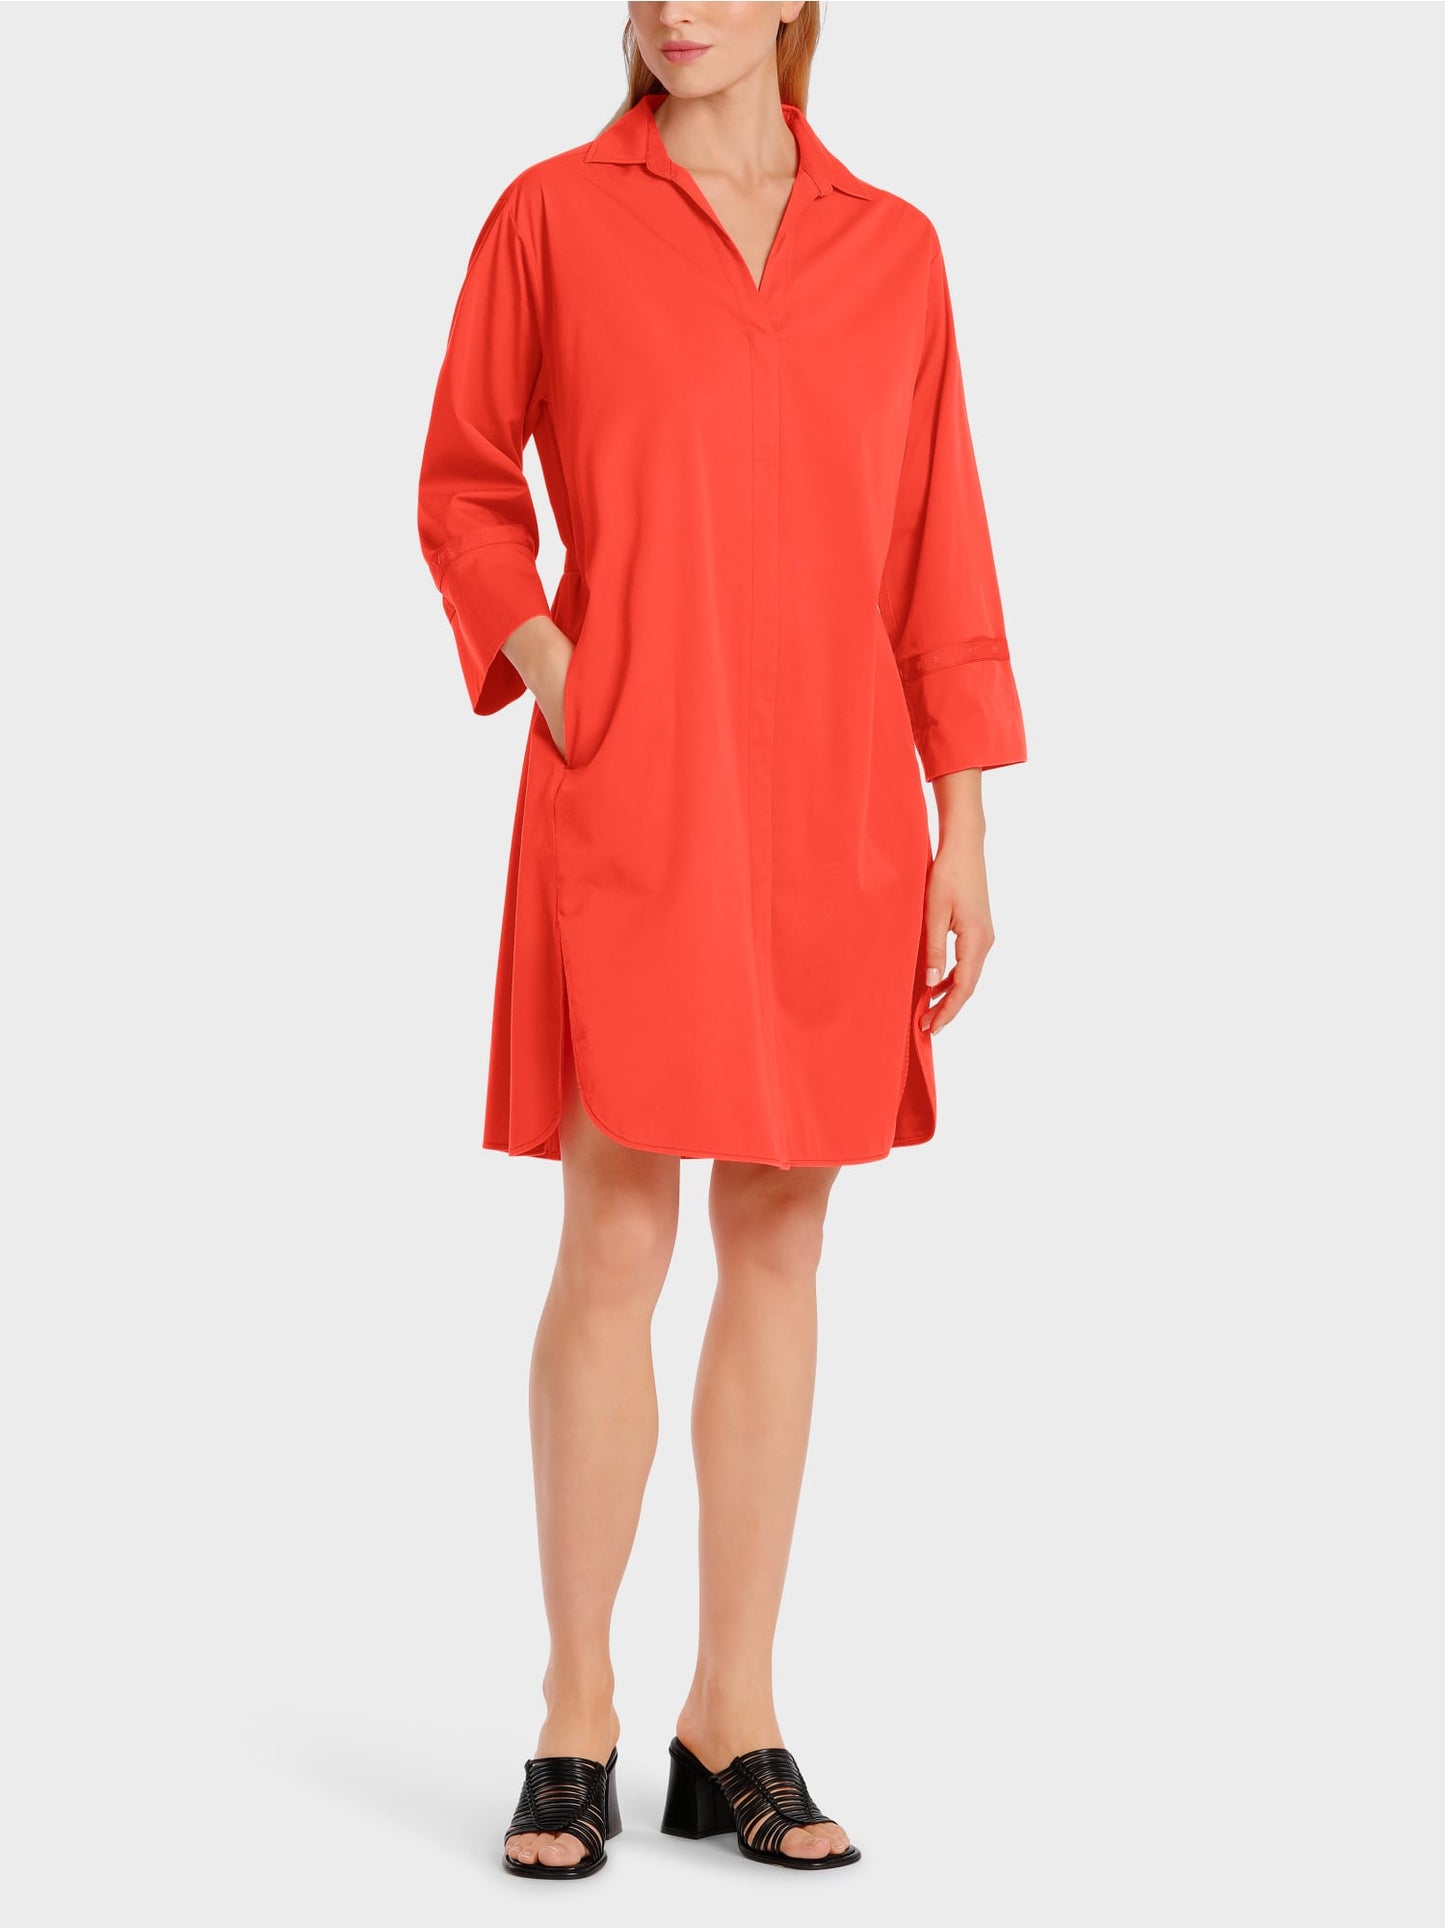 Shirt dress with ¾ sleeves